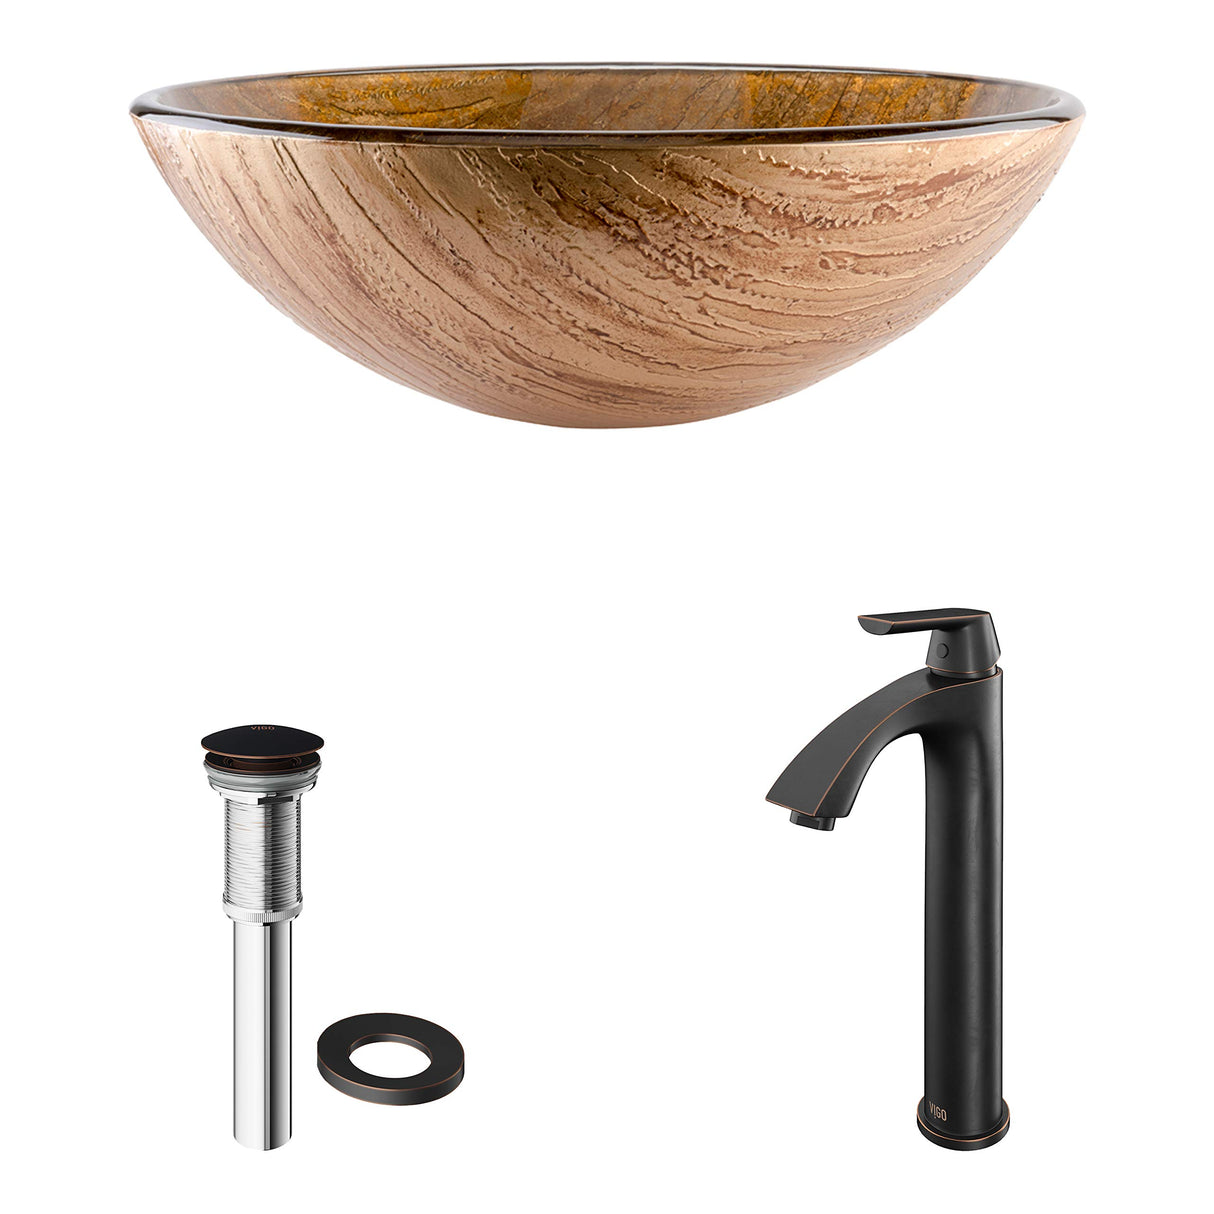 VIGO VGT391 16.5" L -16.5" W -12.38" H Handmade Countertop Glass Round Vessel Bathroom Sink Set in Wooden Finish with Antique Rubbed Bronze Single-Handle Single Hole Faucet and Pop Up Drain